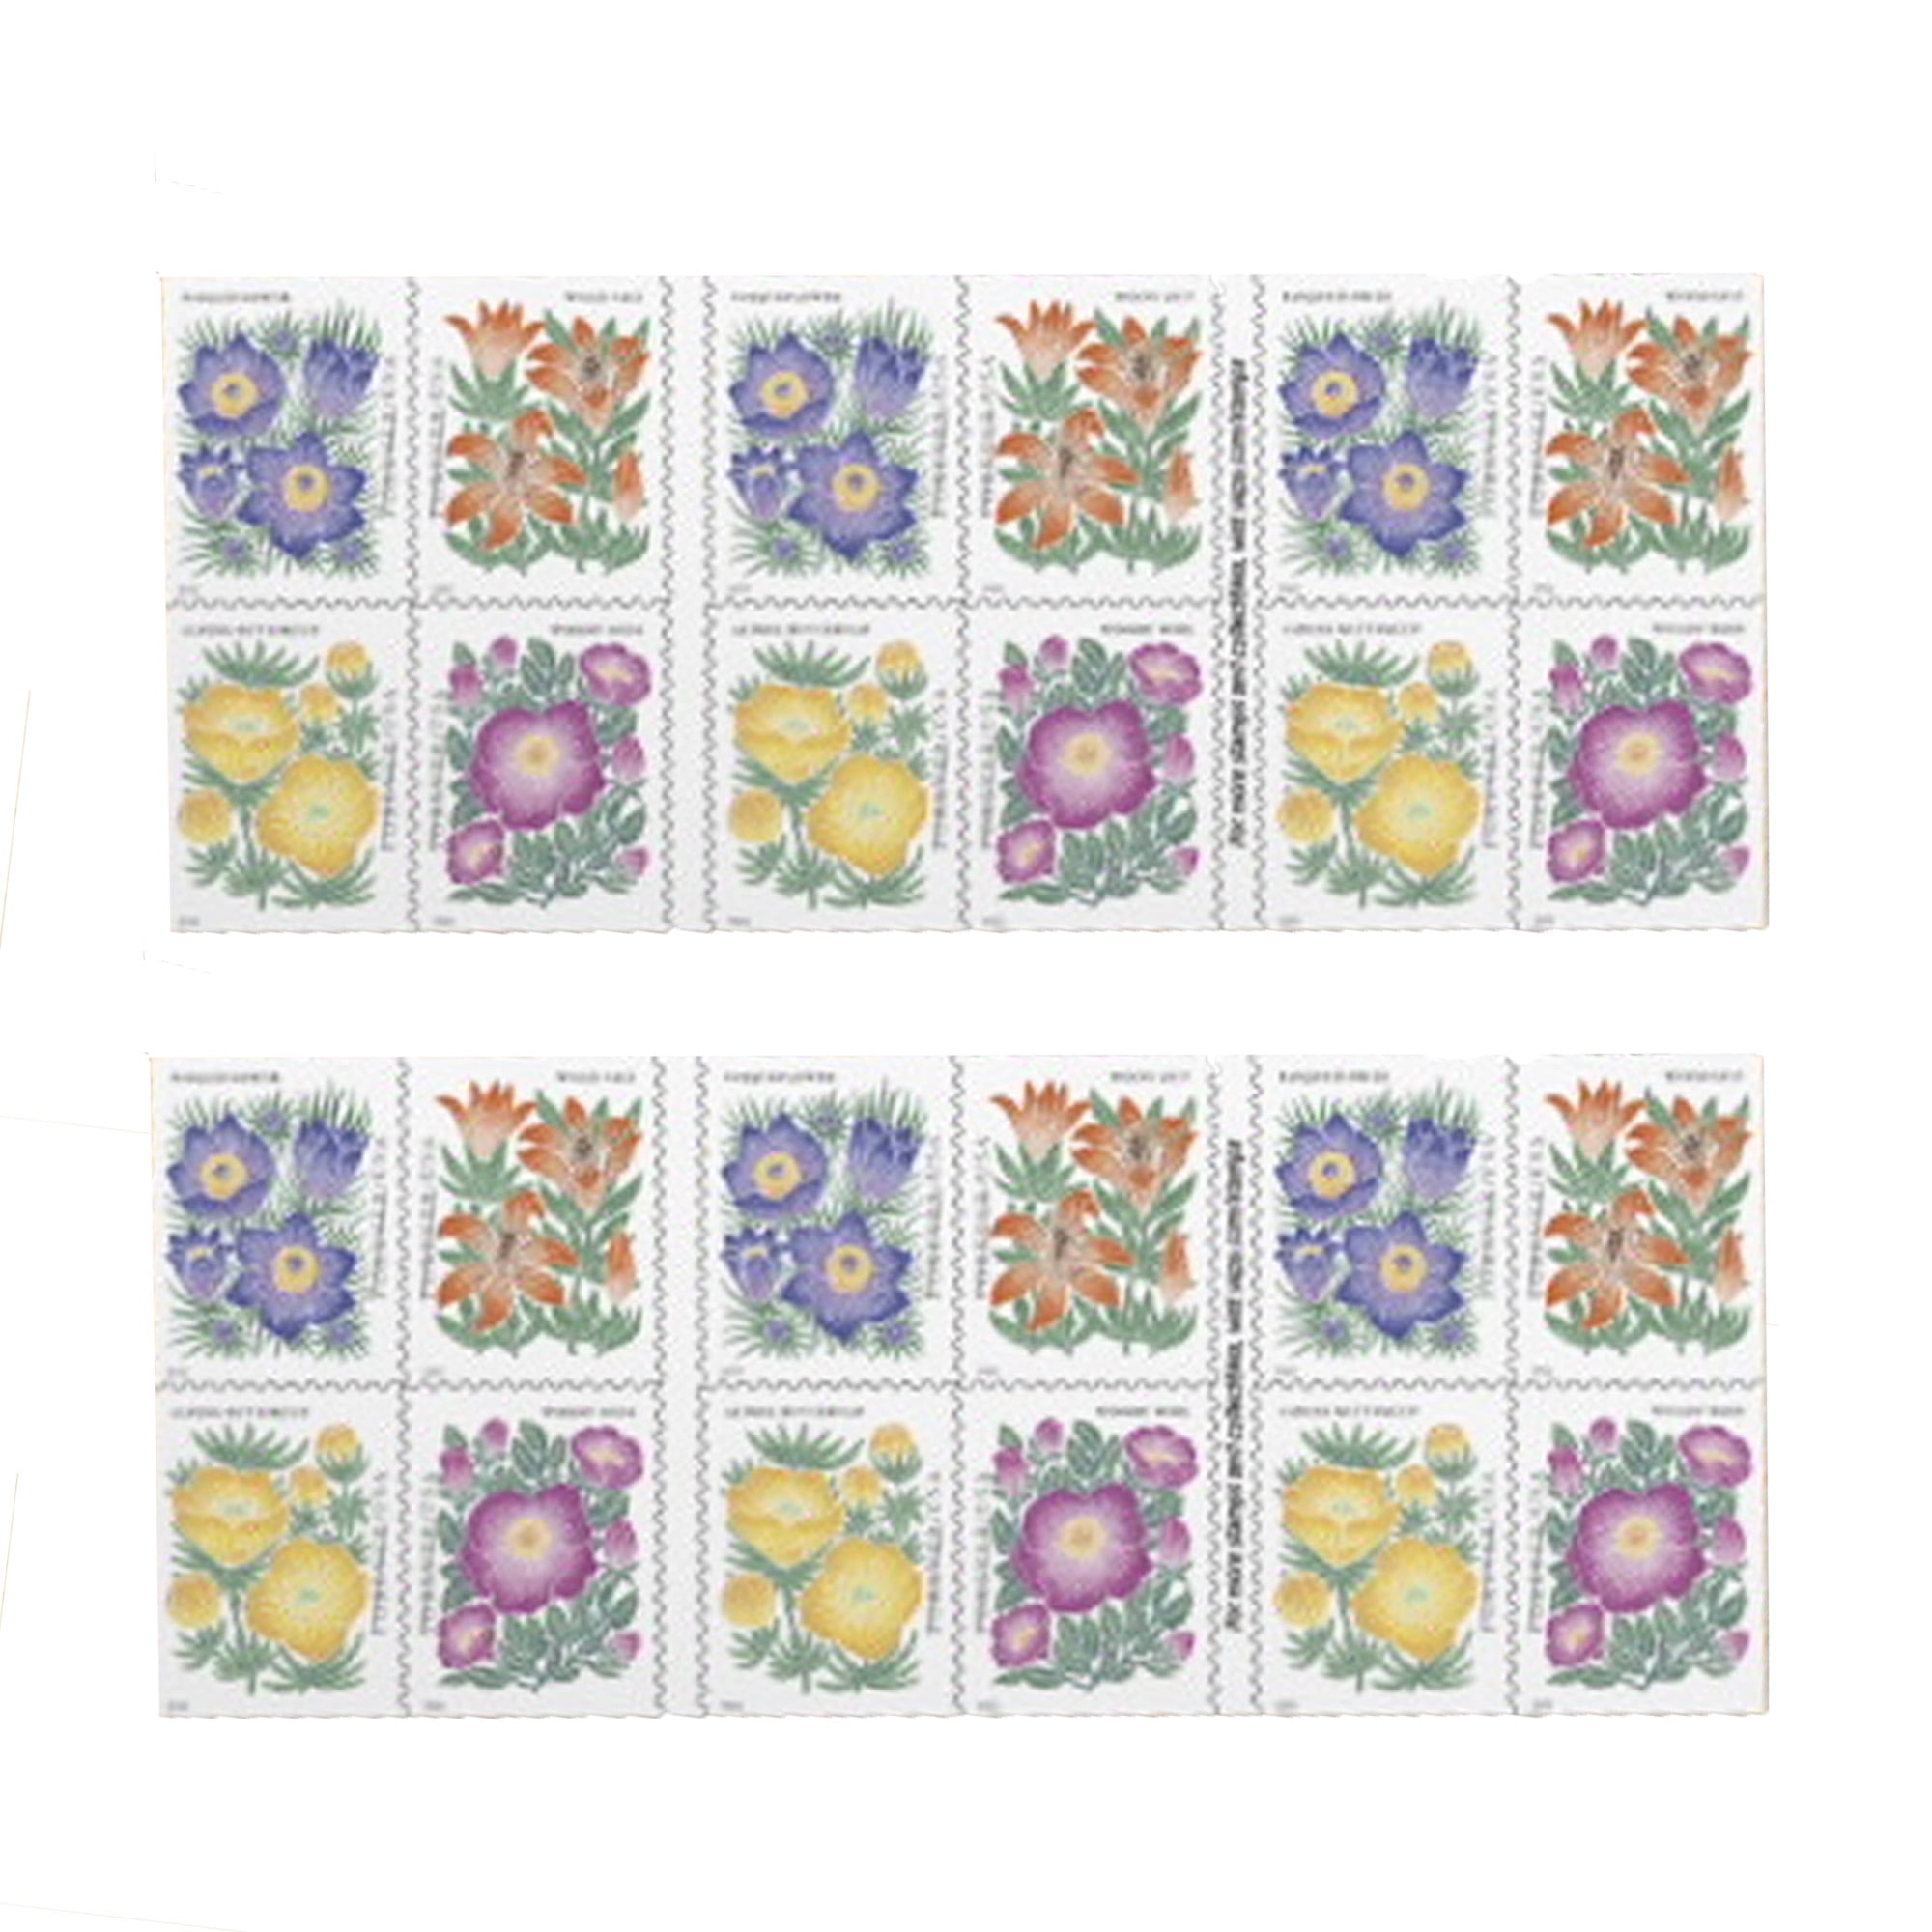 Mountain Flora USPS Forever Postage Stamp 1 Book of 20 US First Class  Wedding Celebration Anniversary Flower Party (20 Stamps)